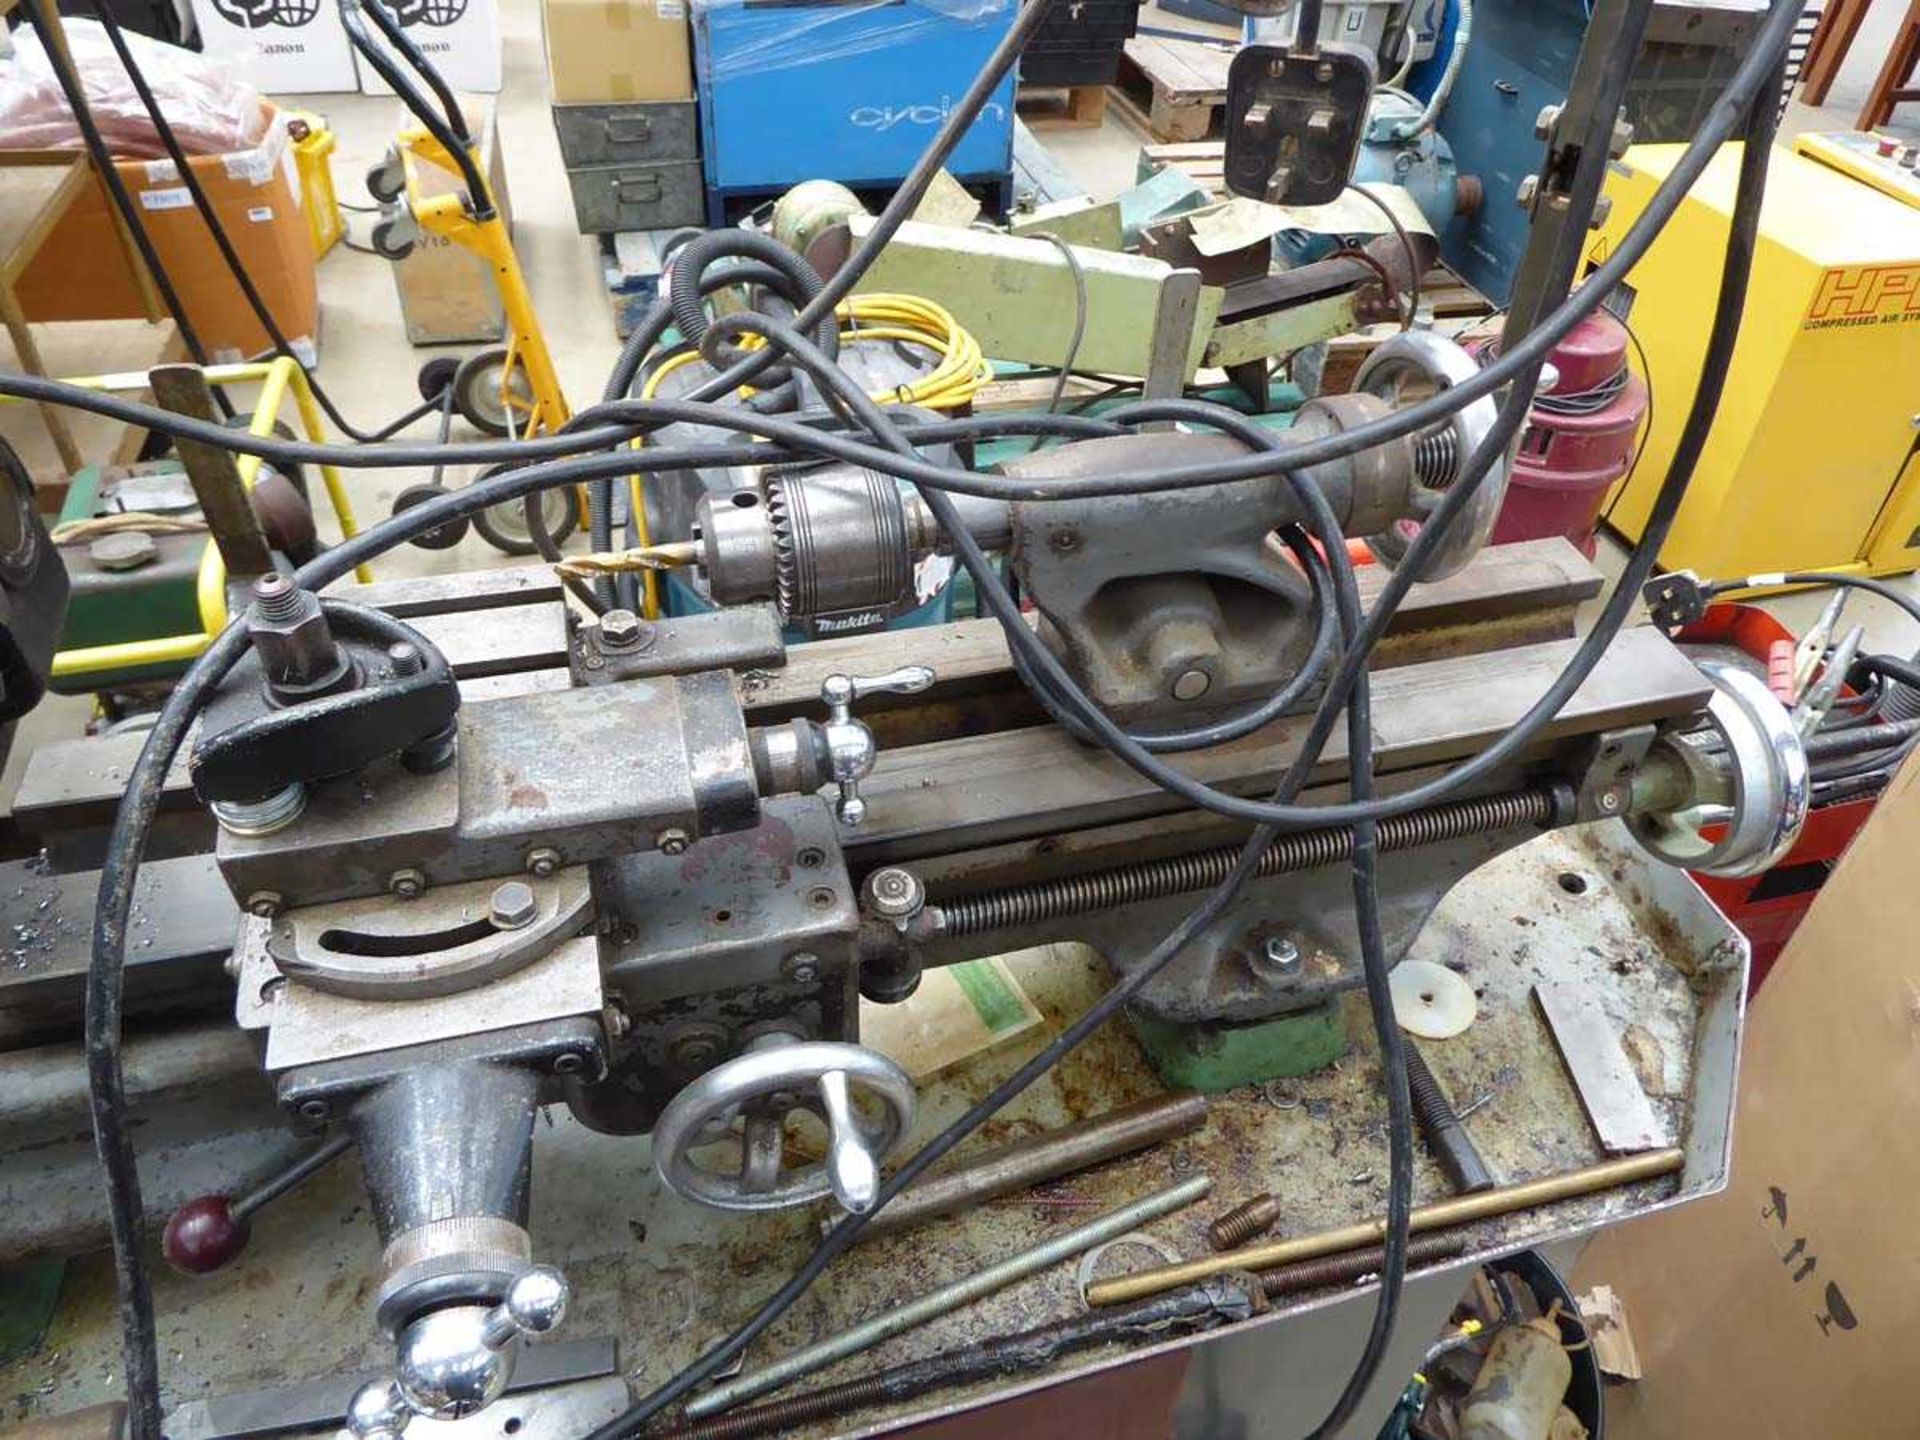 Myford engineers model making lathe with a range of tooling, single phase with control box. - Image 3 of 3